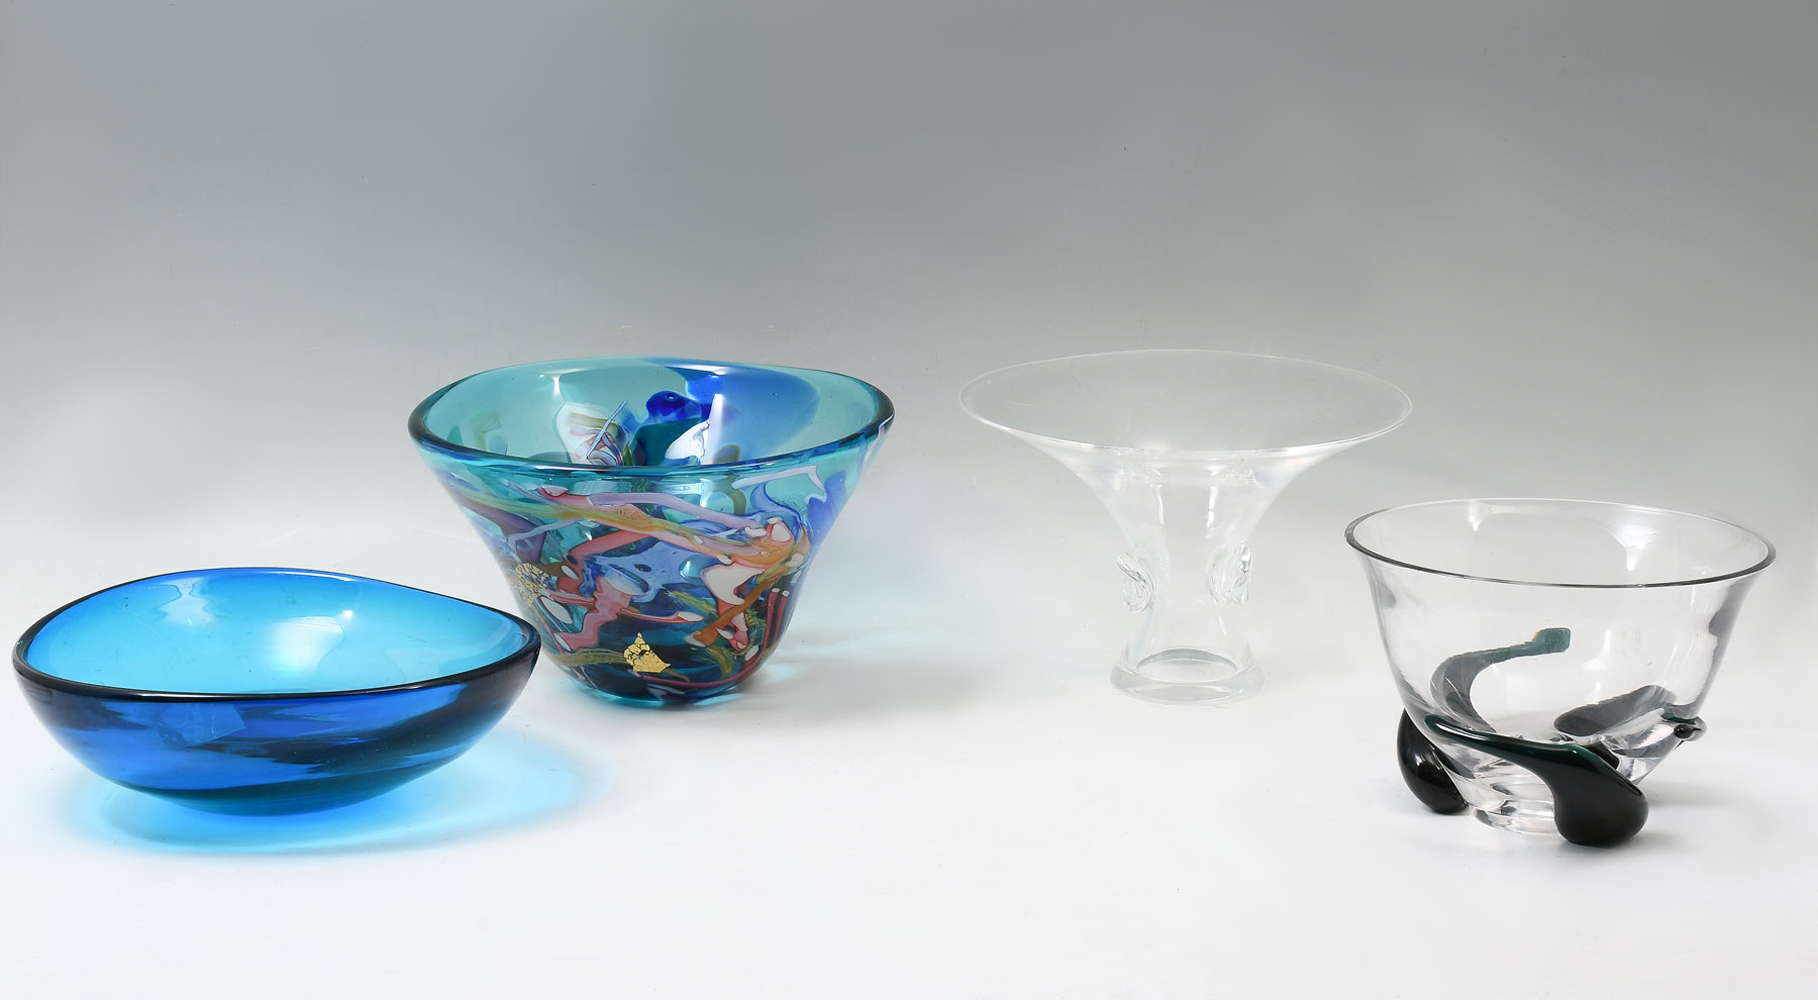 4 PC. ART GLASS VASE COLLECTION: